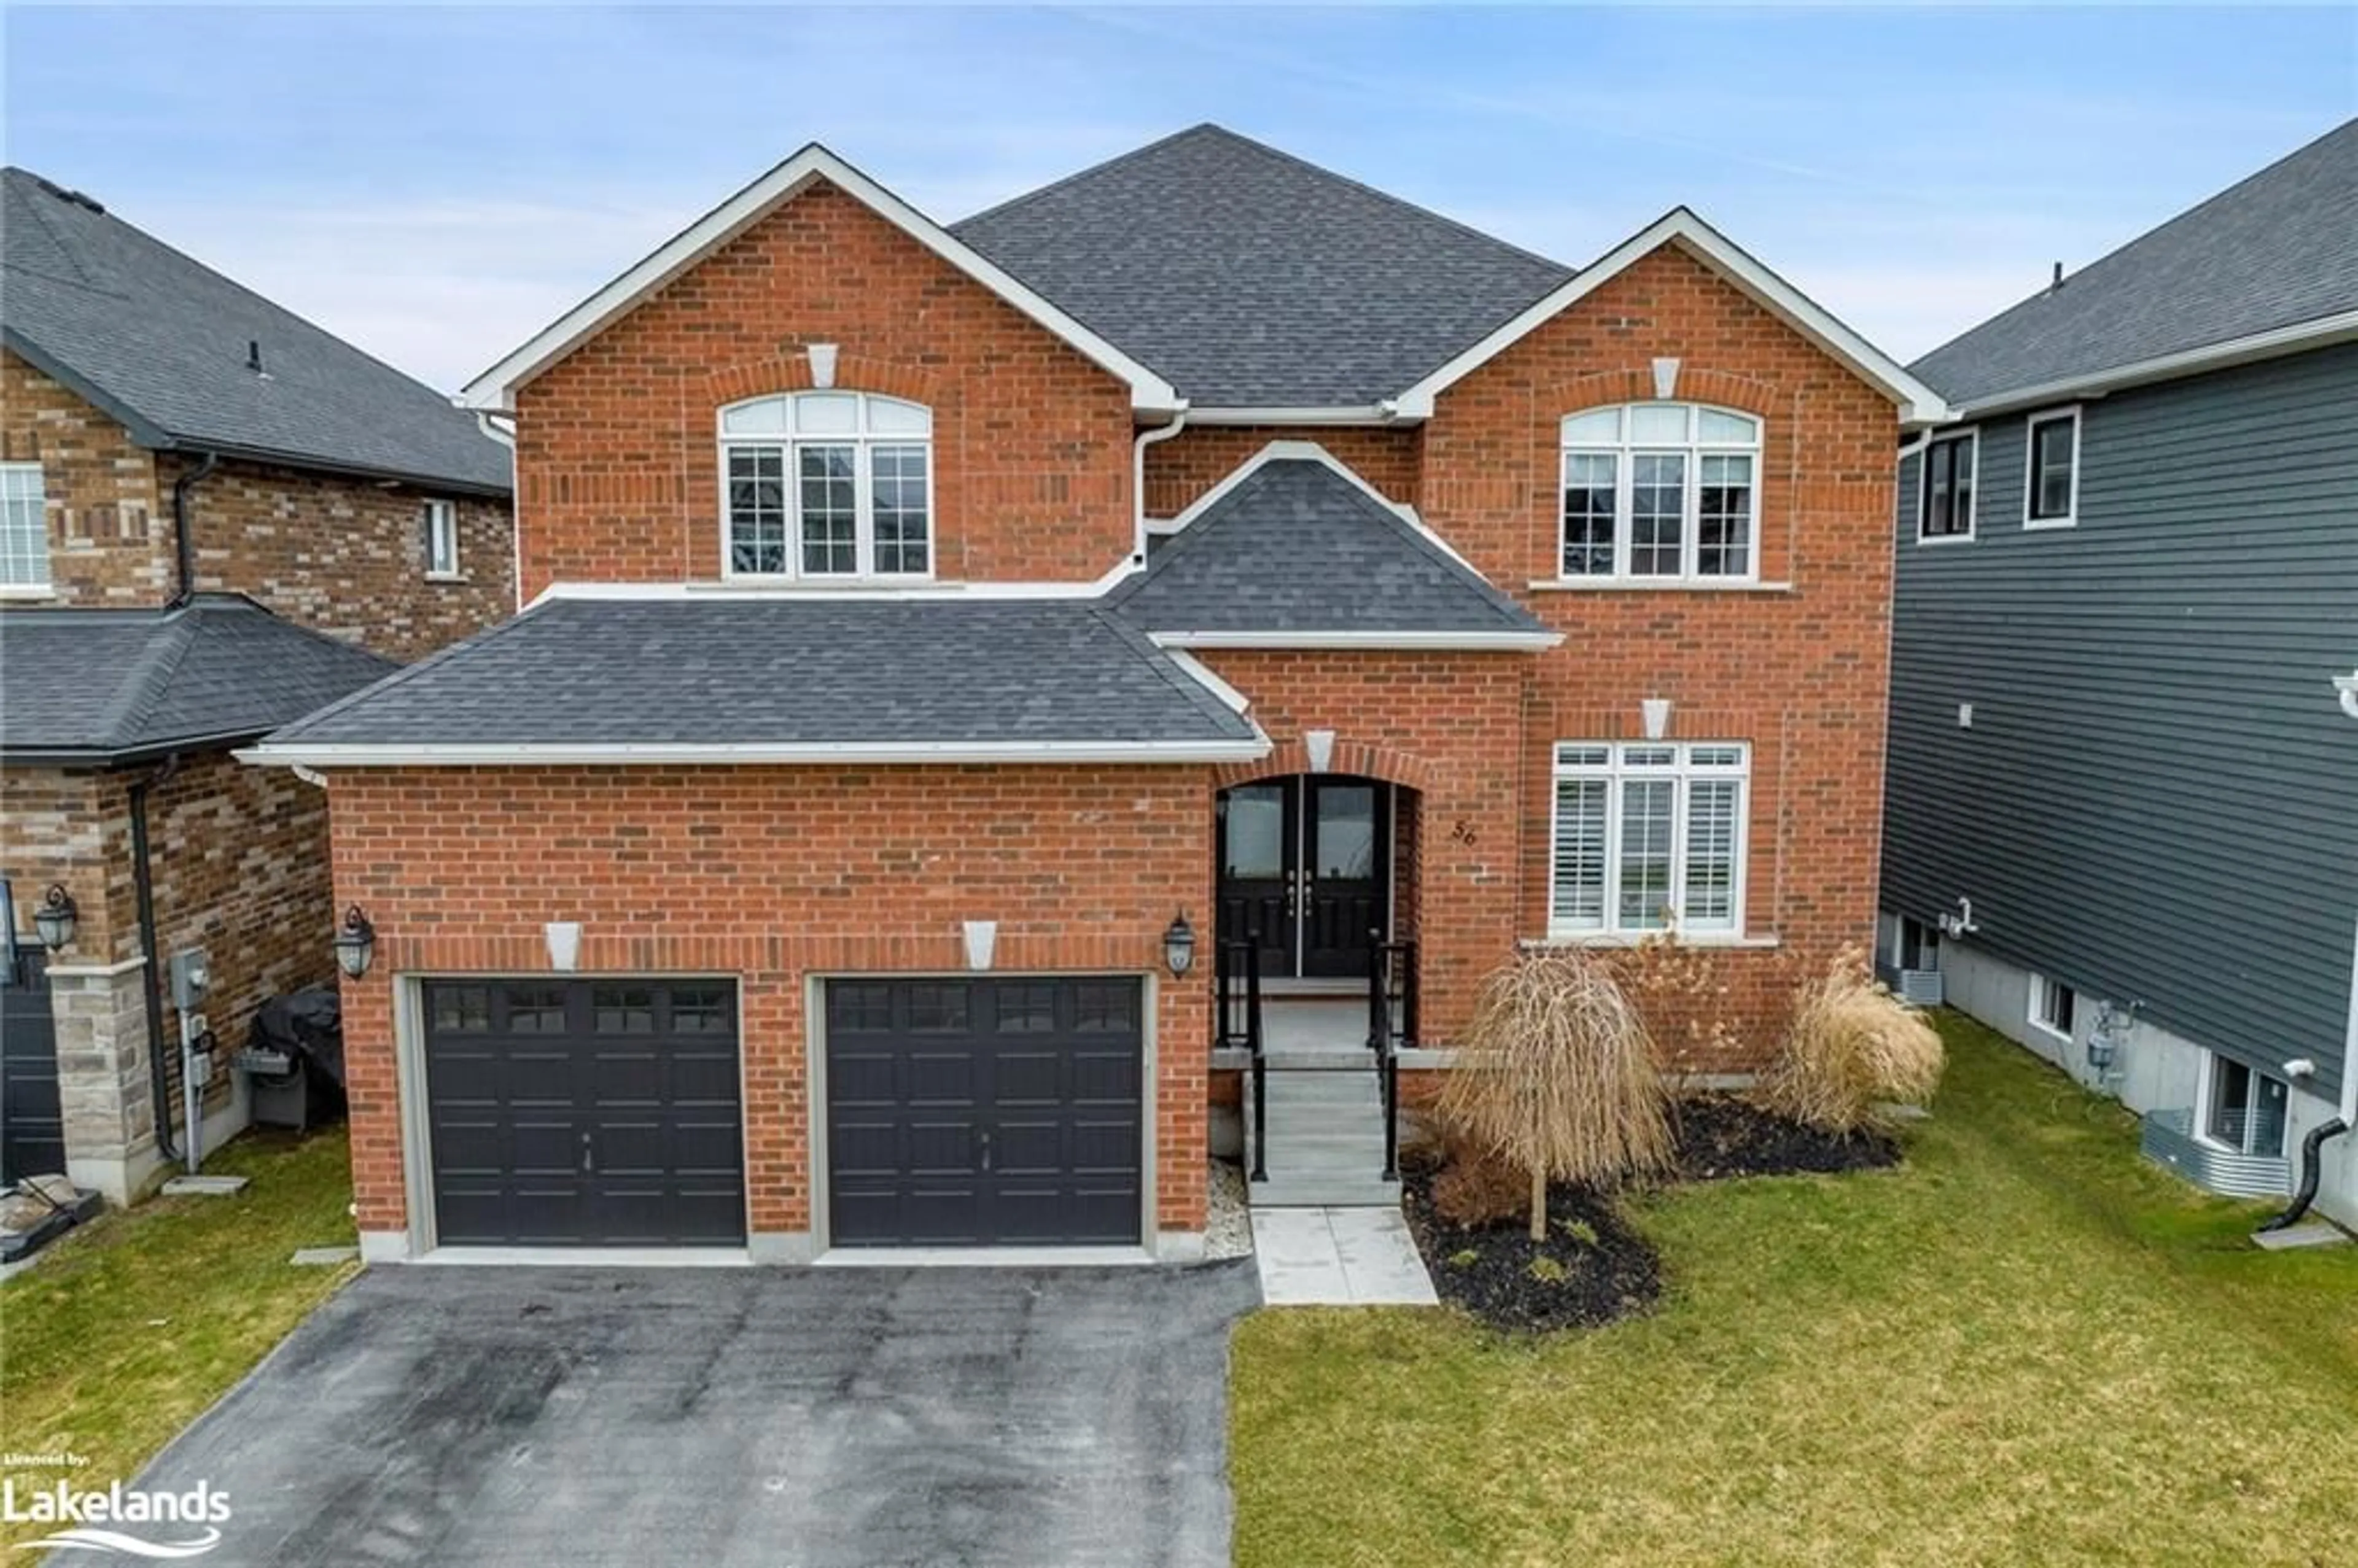 Home with brick exterior material for 56 Lockerbie Cres, Collingwood Ontario L9Y 4S1